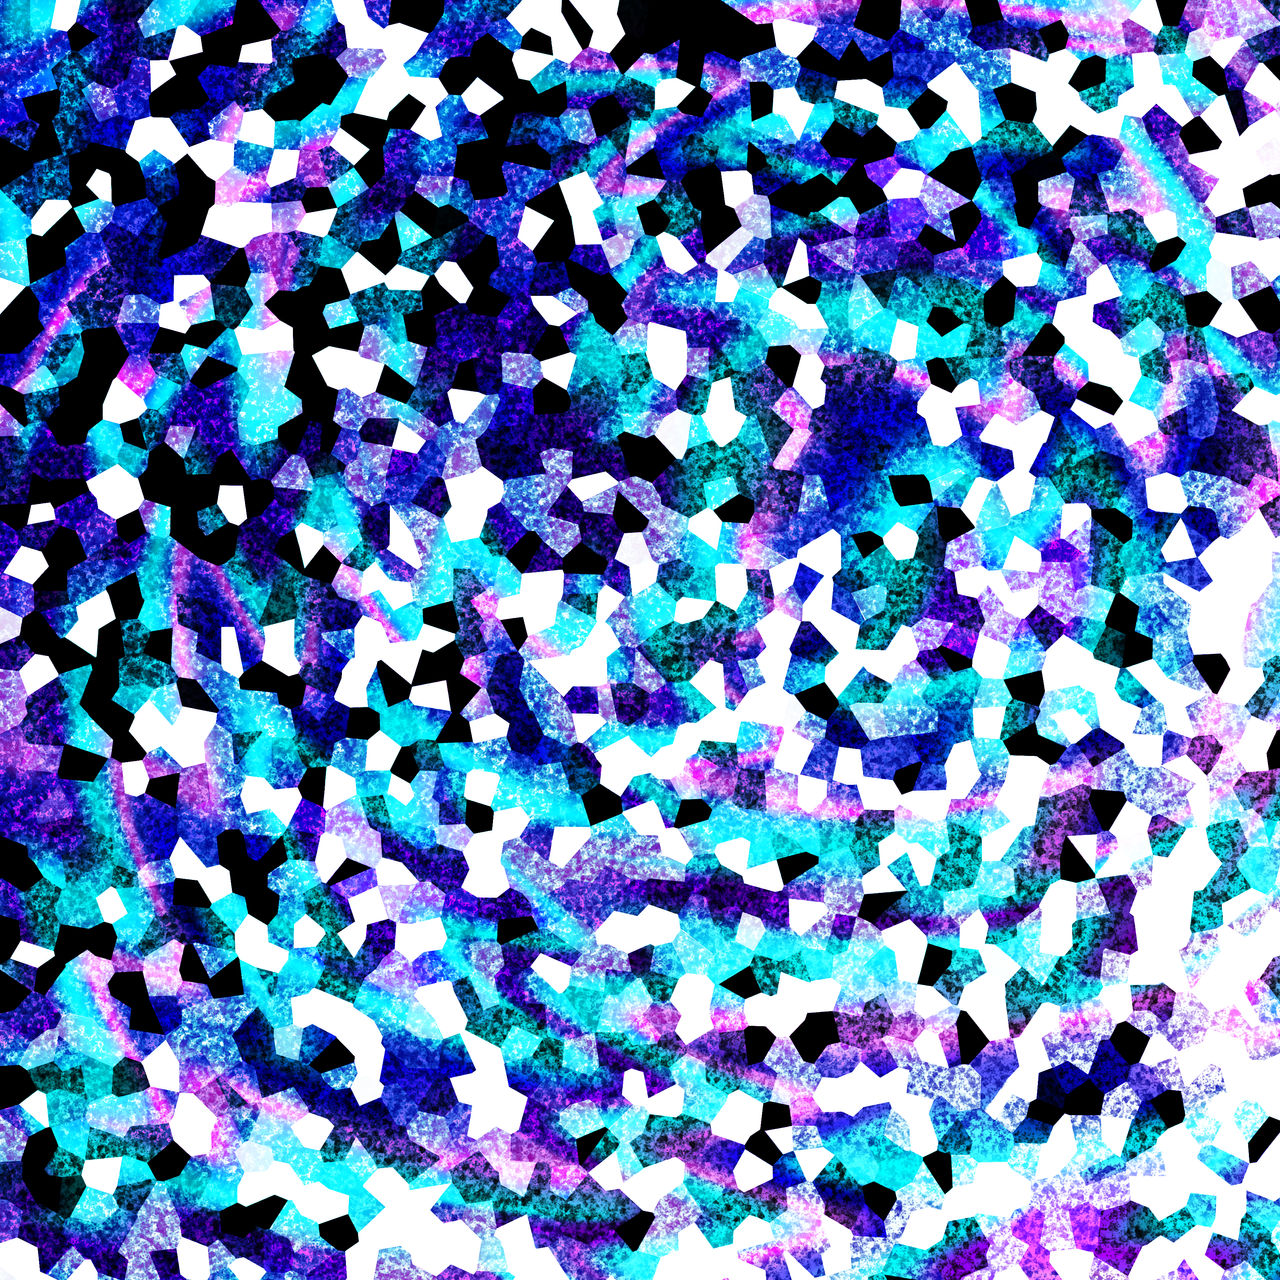 Digital Glitter Paper 001 - Free Commercial Use! by INFPoetics on DeviantArt